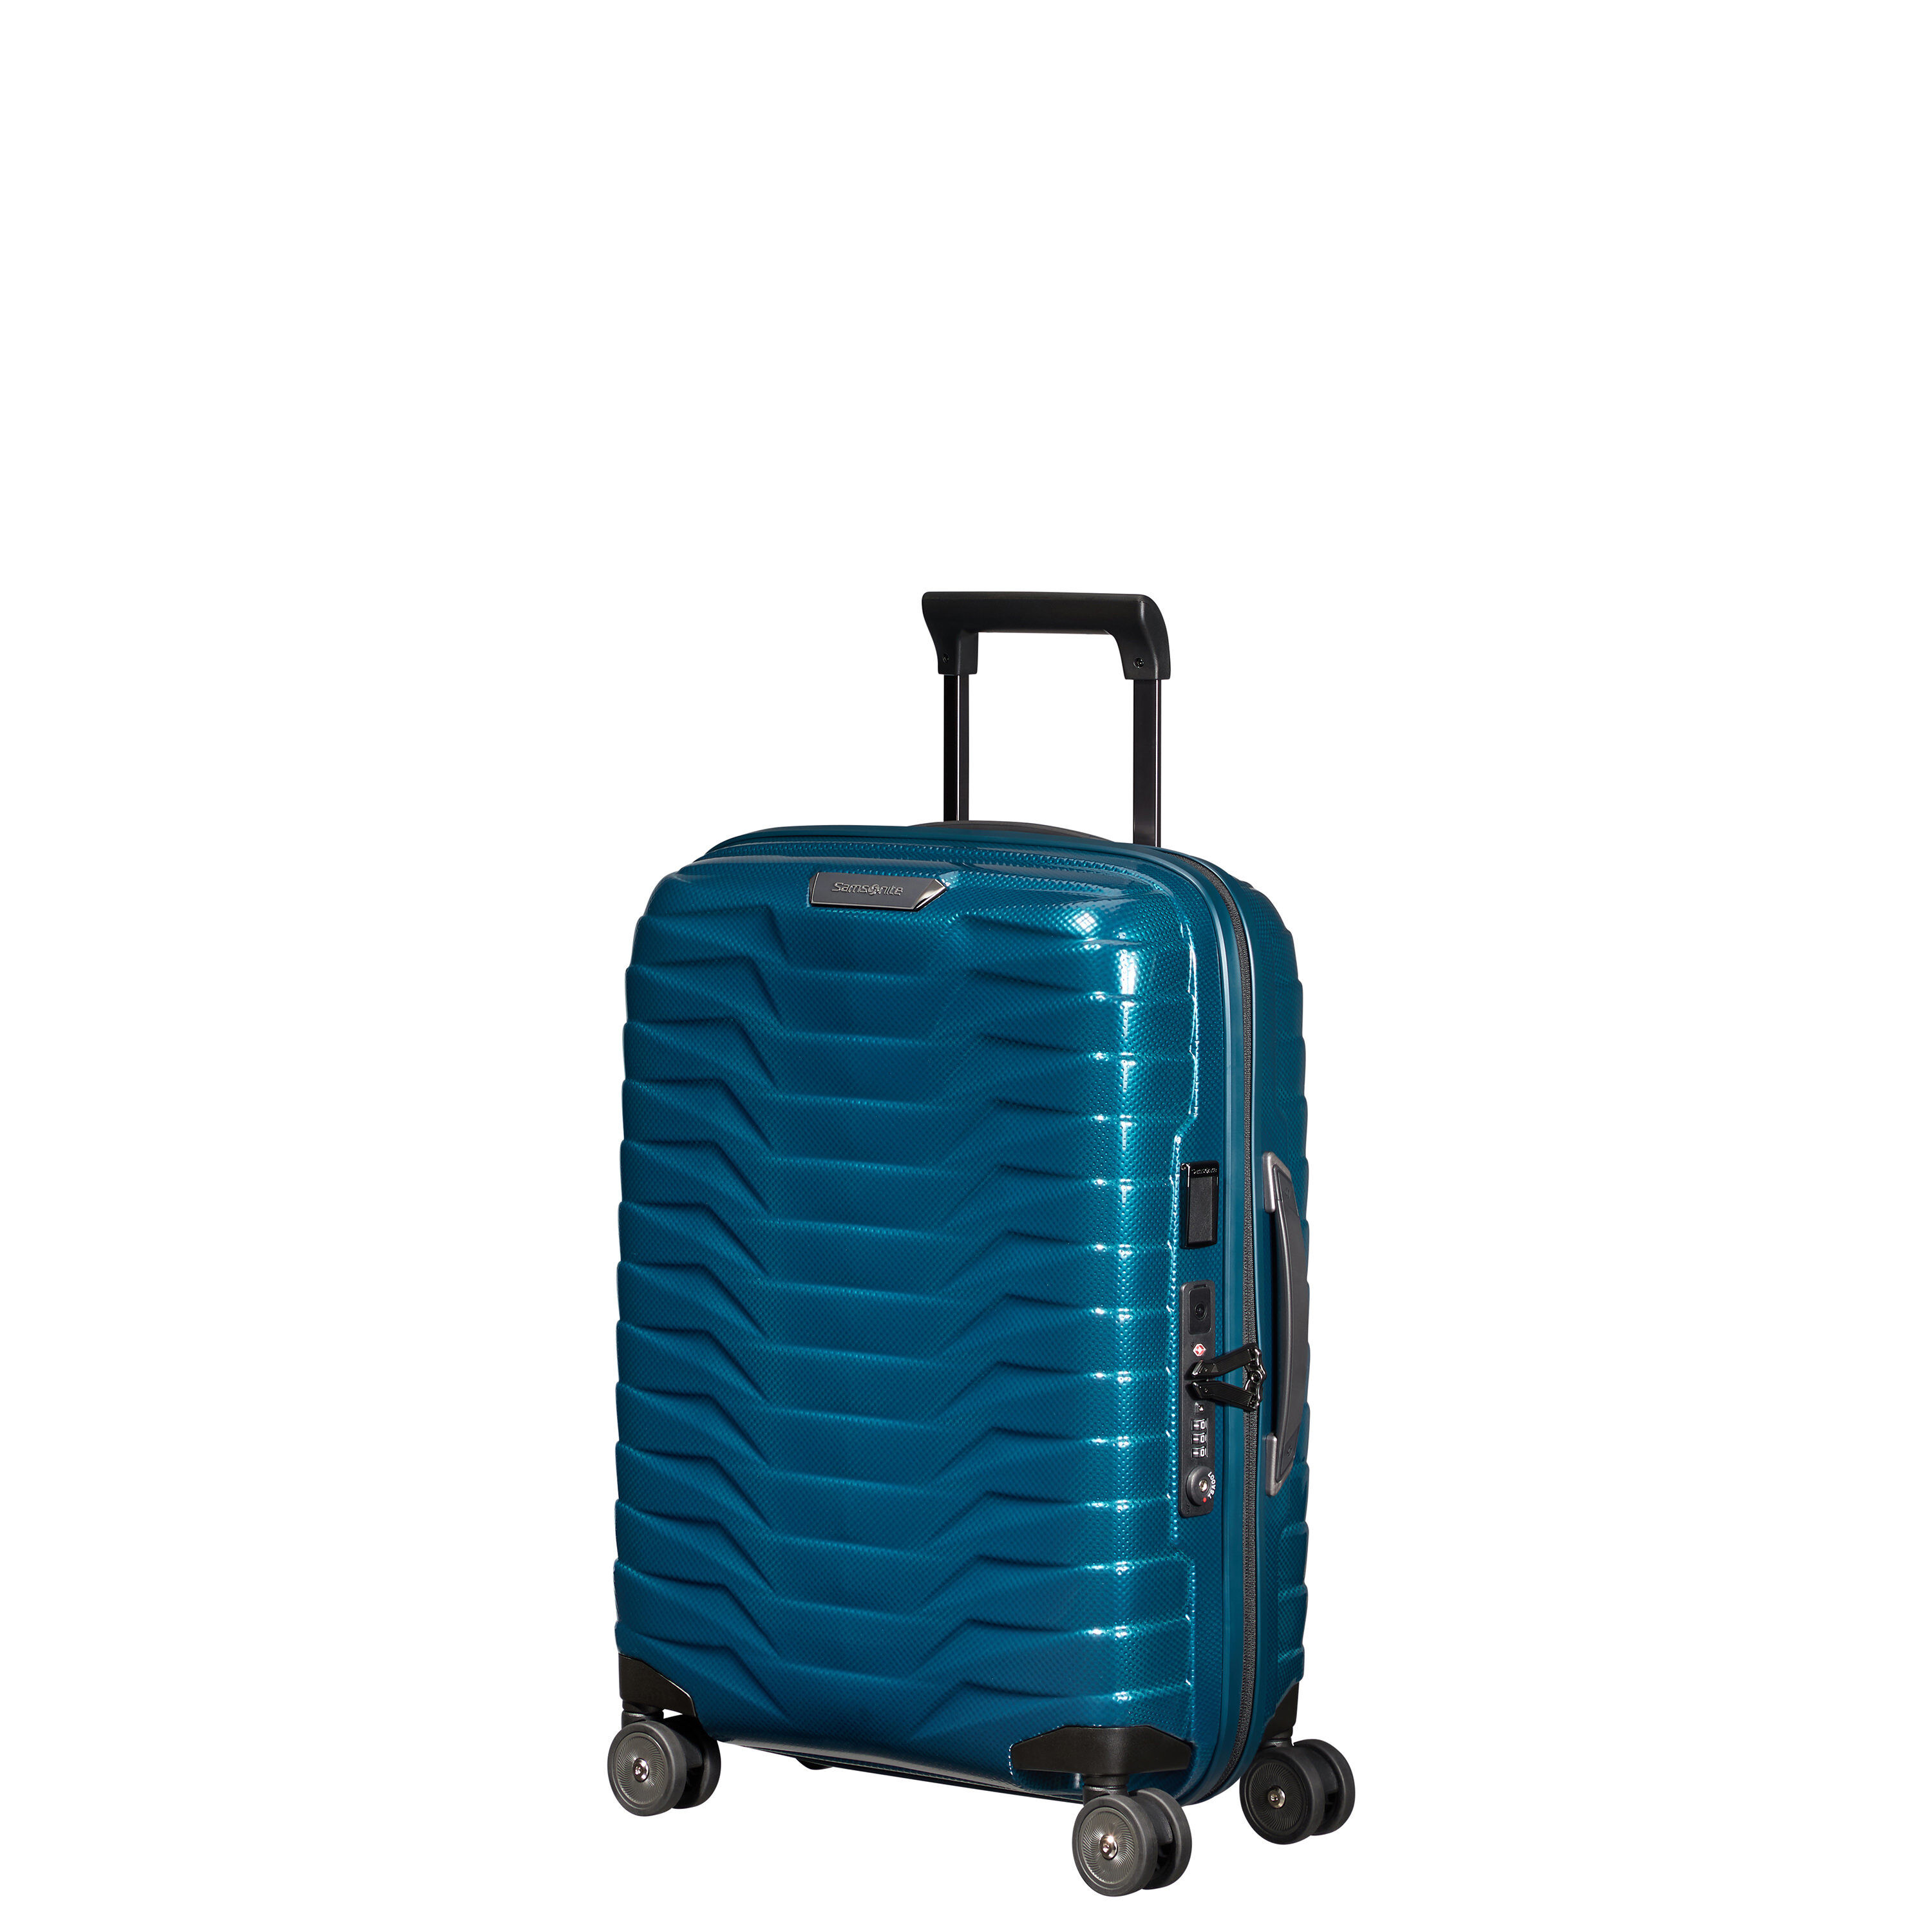 Buy Proxis 22 x 14 x 9 Carry-On Spinner for USD 500.00 | Samsonite US